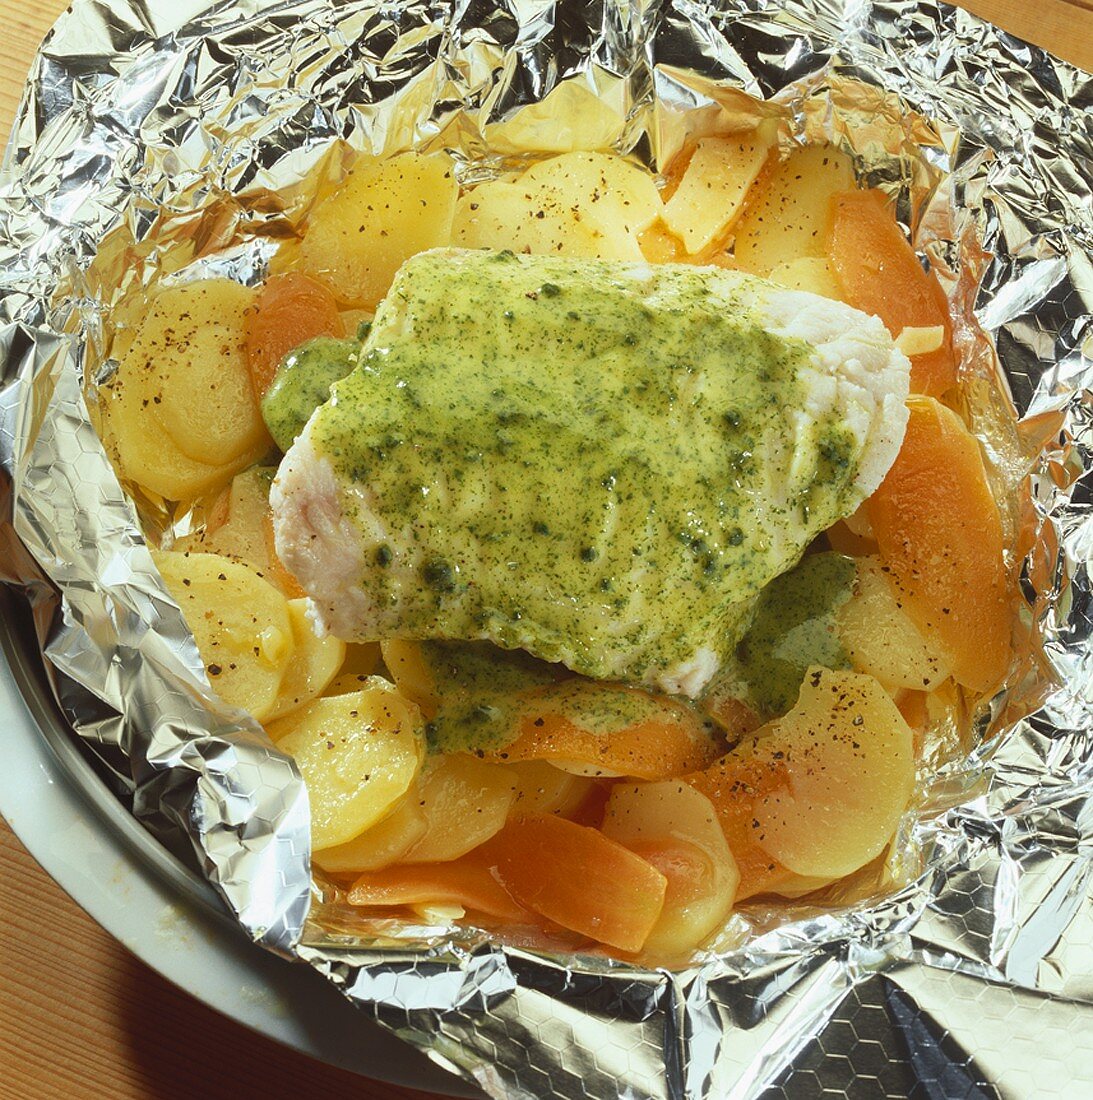 Fish fillet in foil with potatoes, carrots and herb sauce